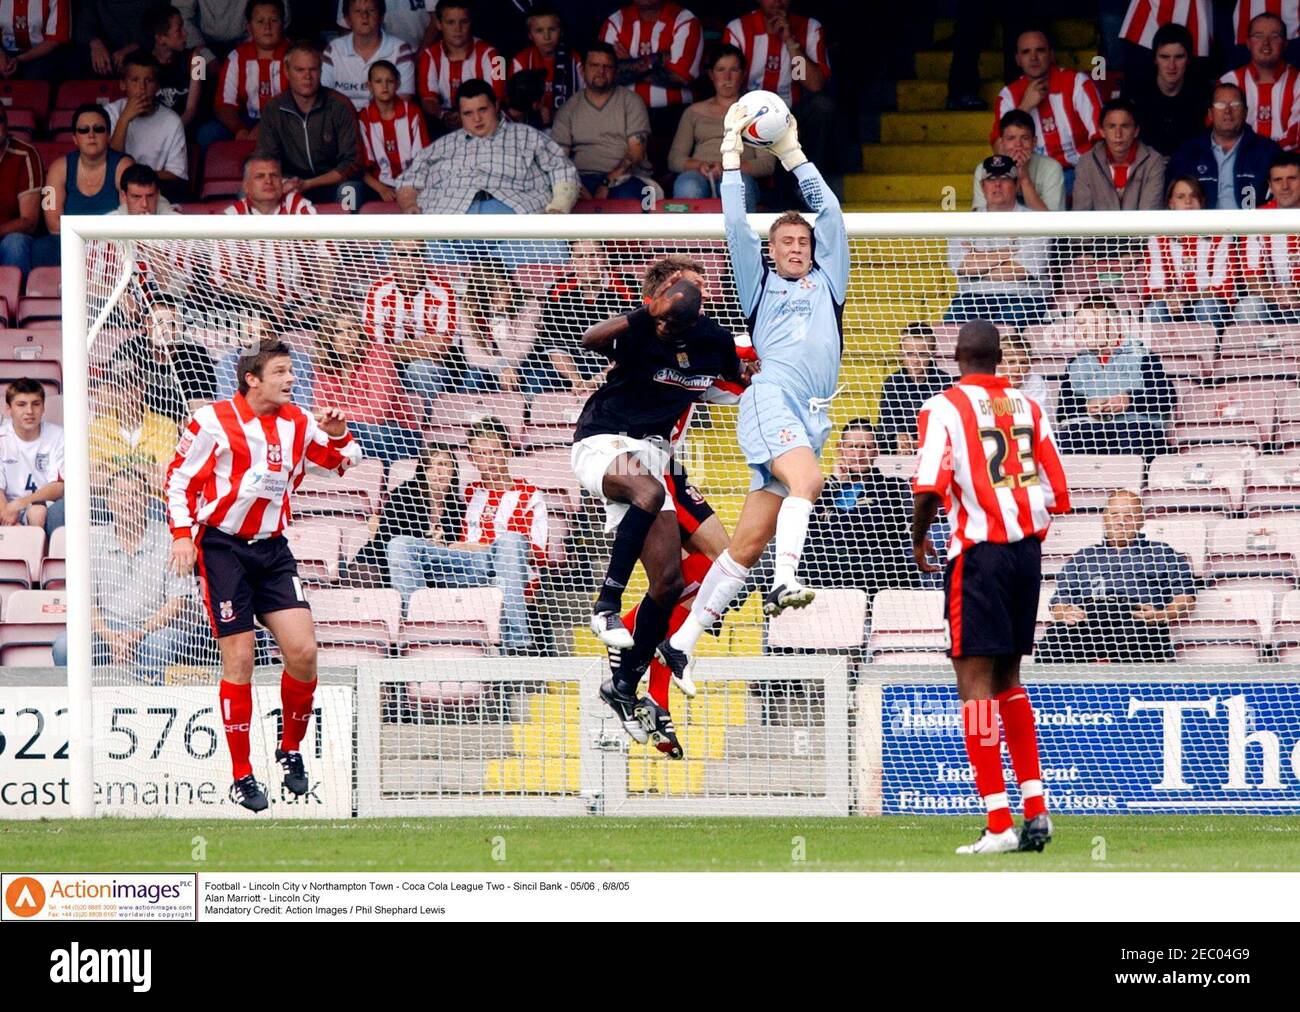 Football - Lincoln City v Northampton Town - Coca-Cola  League Two - Sincil Bank - 05/06 , 6/8/05  Alan Marriott - Lincoln City   Mandatory Credit: Action Images / Phil Shephard Lewis Stock Photo